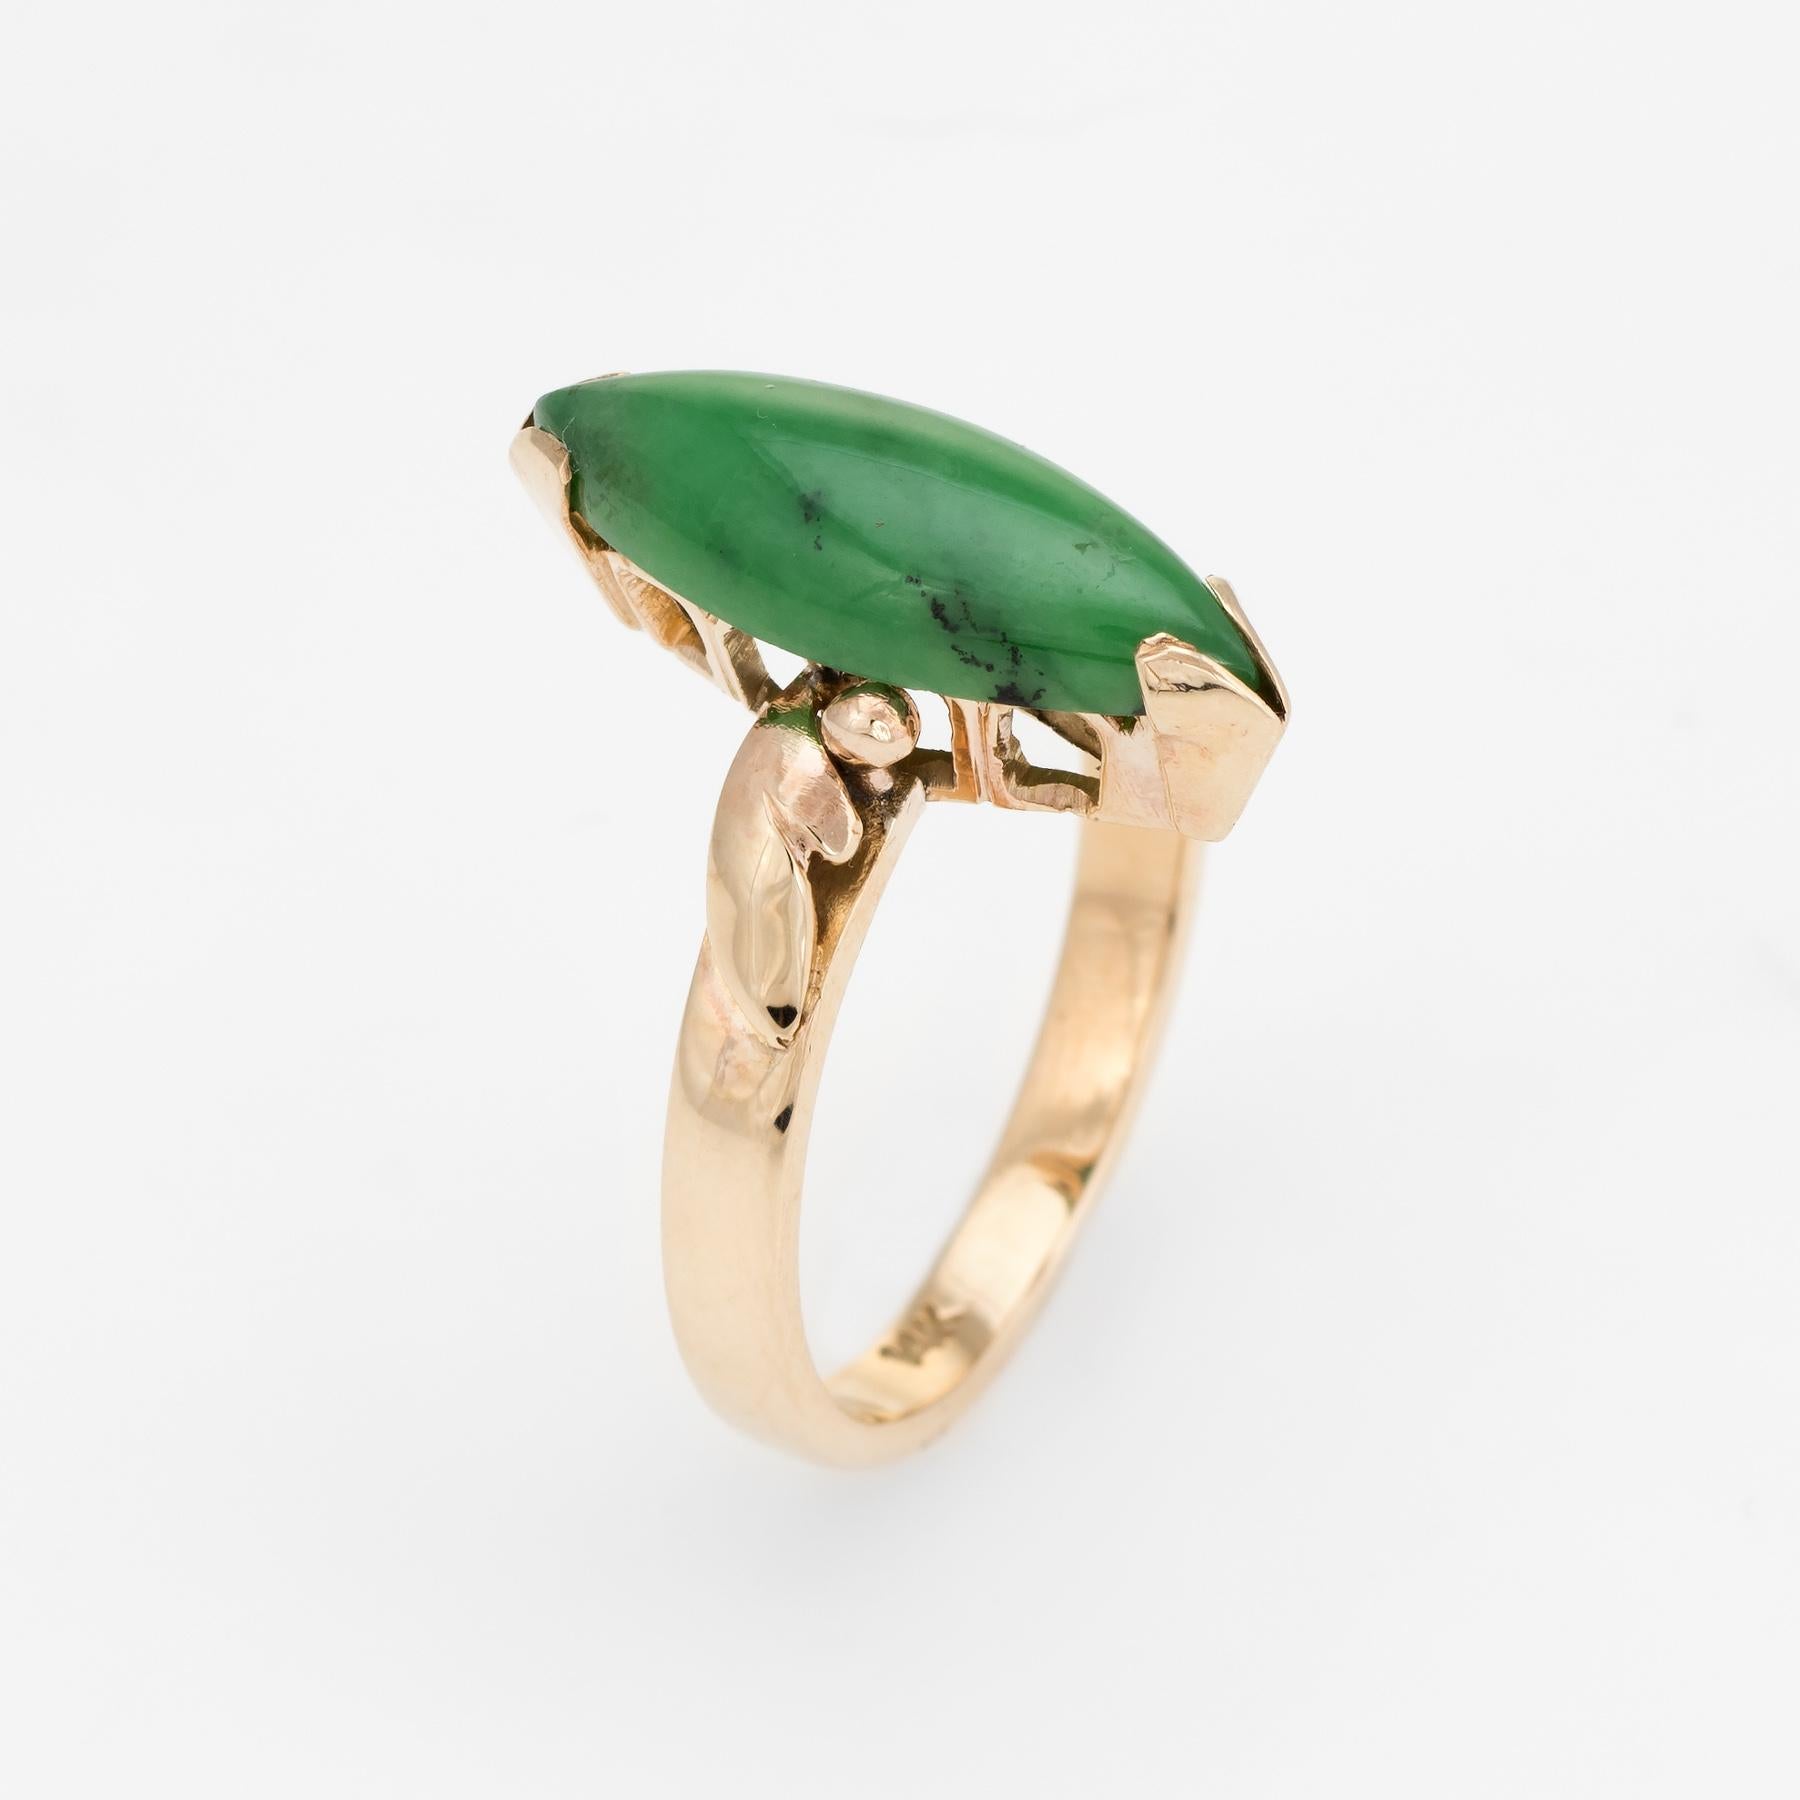 Finely detailed vintage jadeite cocktail ring (circa 1950s to 1960s), crafted in 14 karat yellow gold. 

Cabochon cut jade measures 18mm x 6.5mm (estimated at 3 carats). The jade is in excellent condition and free of cracks or chips. 

The elegant